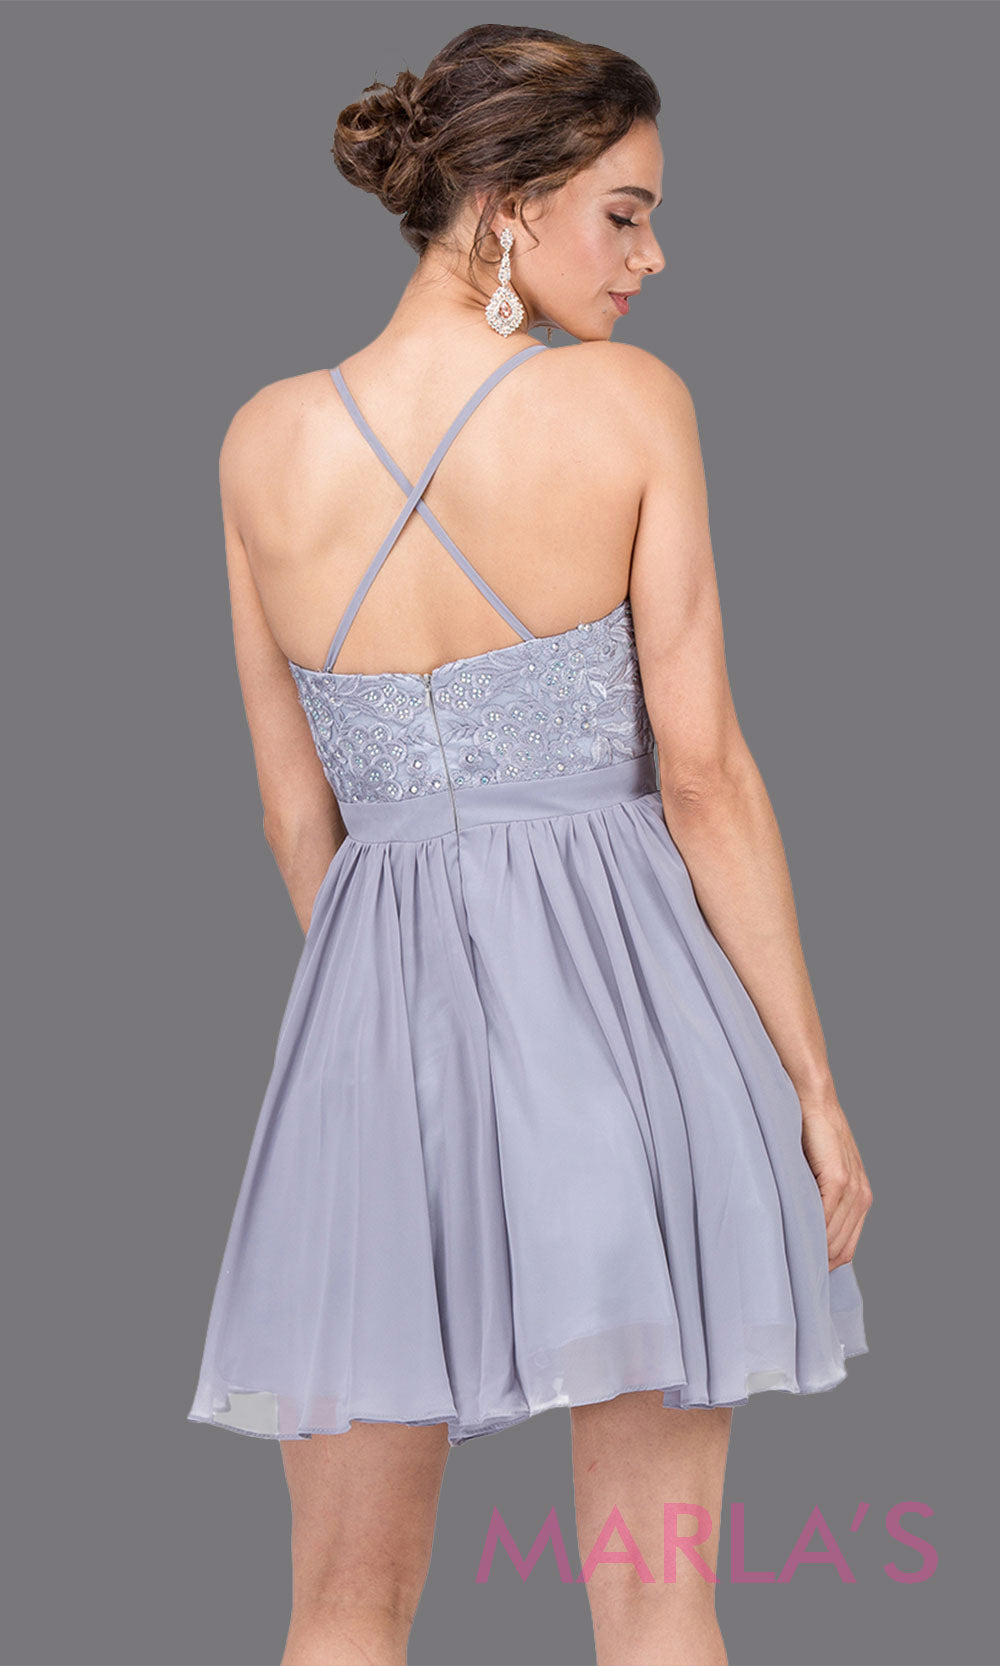 3088.4BShort silver gray flowy chiffon grade 8 grad dress with straps and lace.This v neck light grey graduation dress is great for quinceanera damas, confirmation,bat mitzvah,junior bridesmaid. Plus size Avail